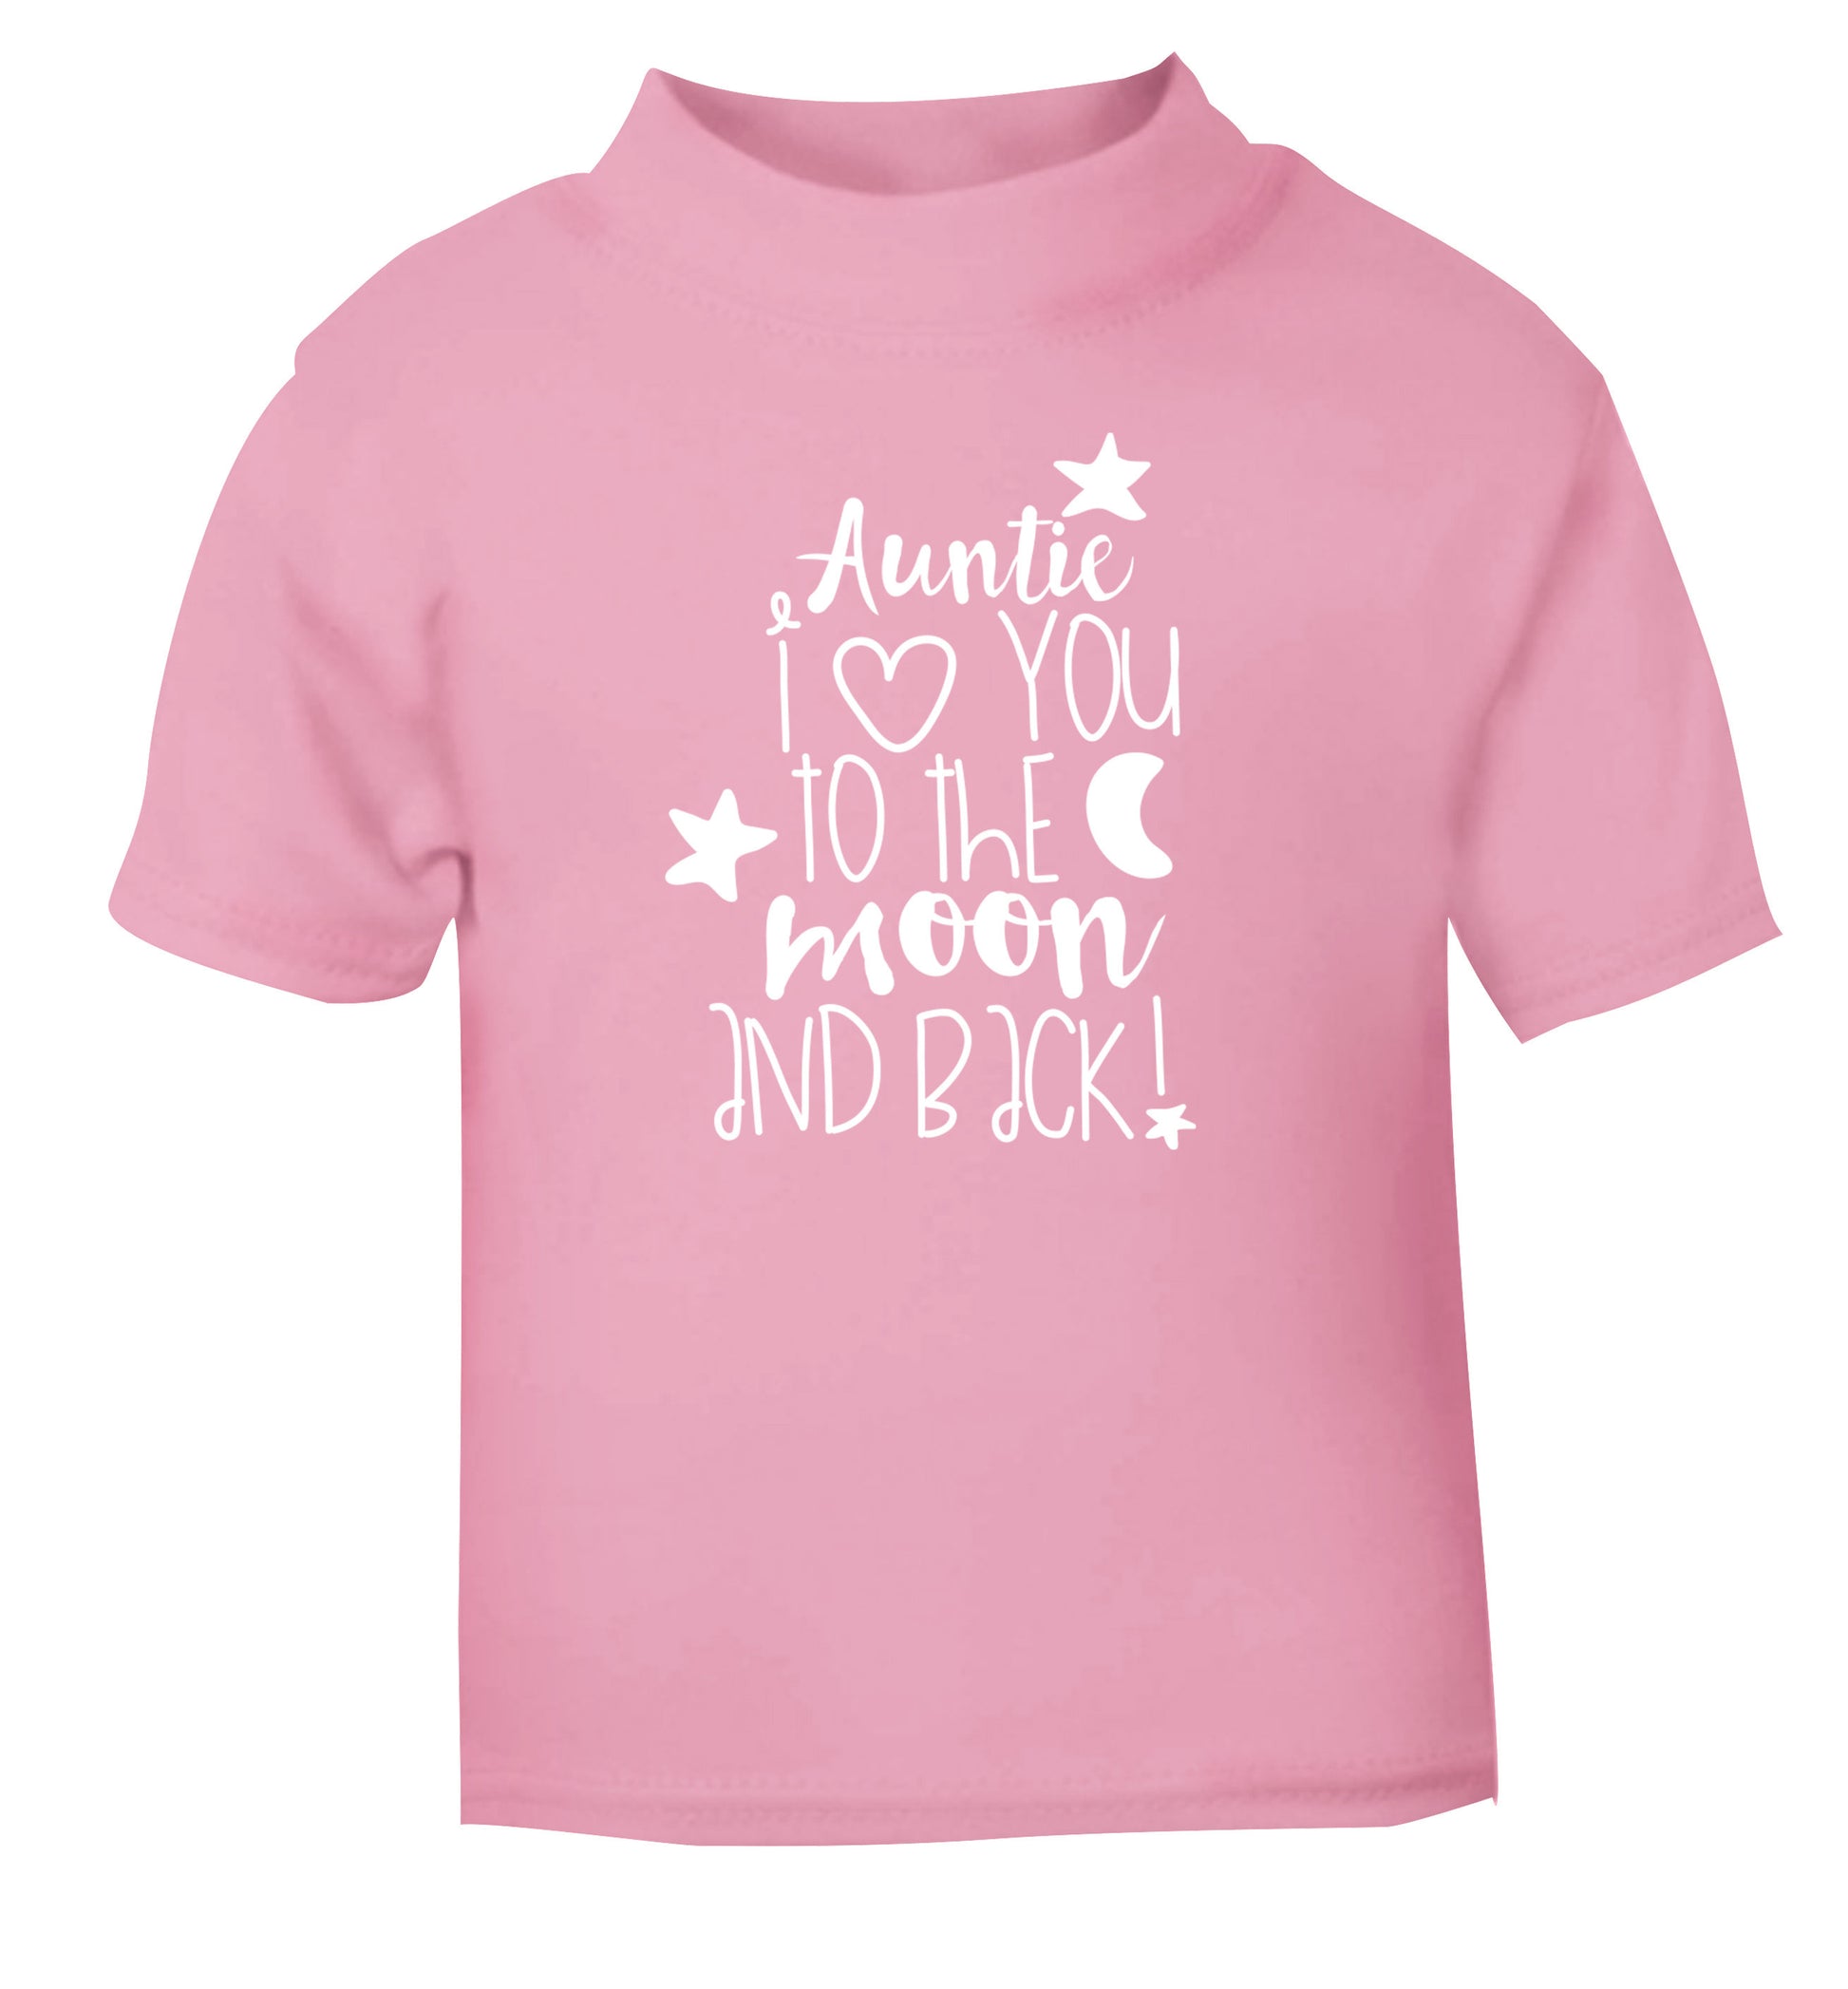 Auntie I love you to the moon and back light pink Baby Toddler Tshirt 2 Years